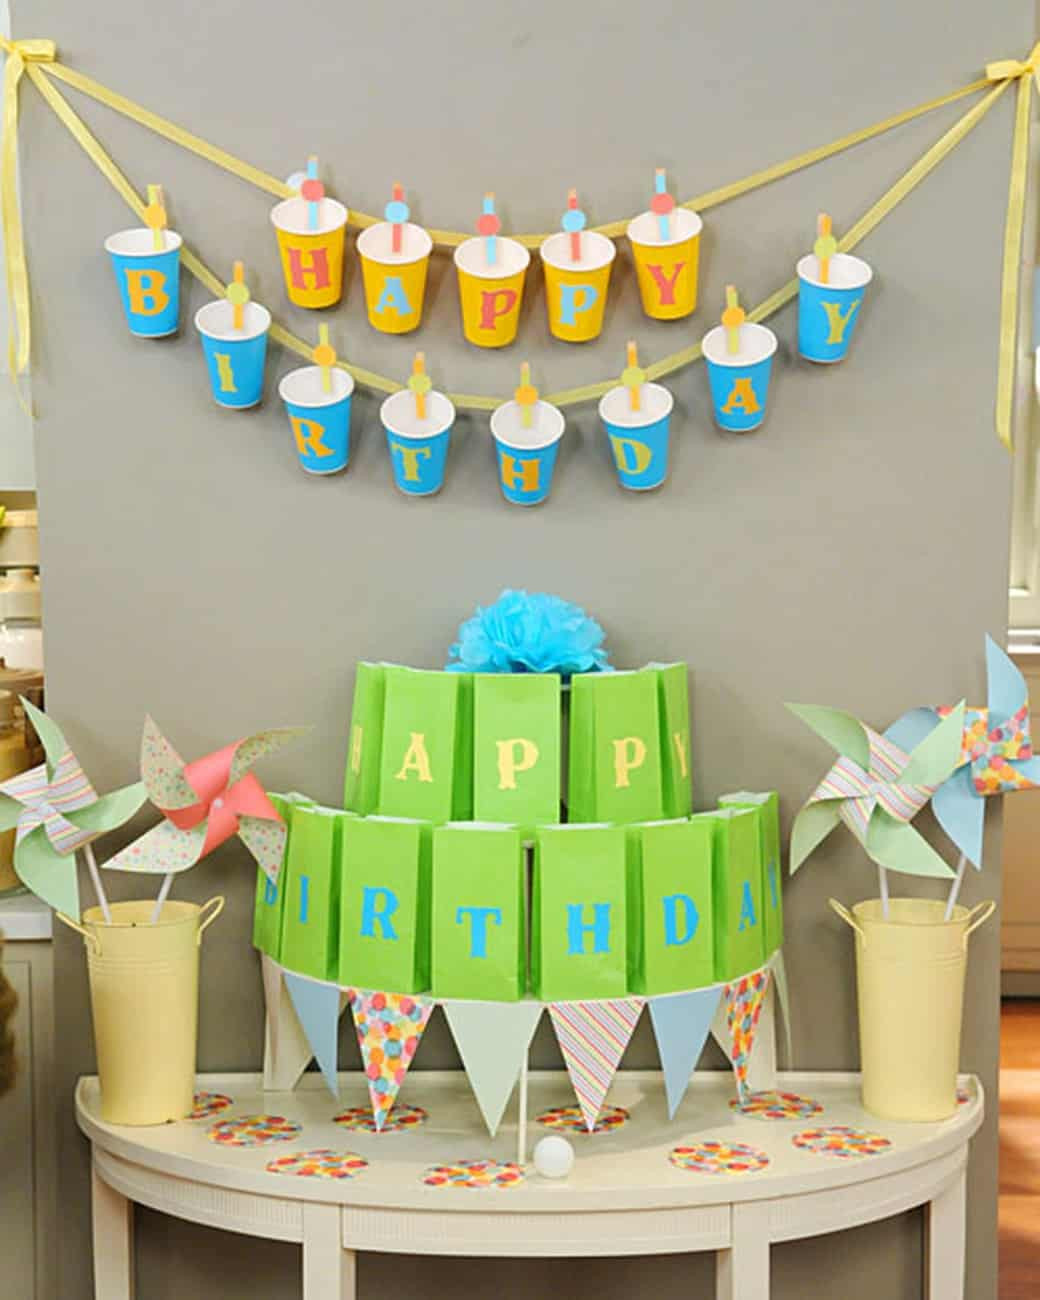 Simple Birthday Party Ideas For Adults
 Celebrate with a Banner Creative Birthday Signs for